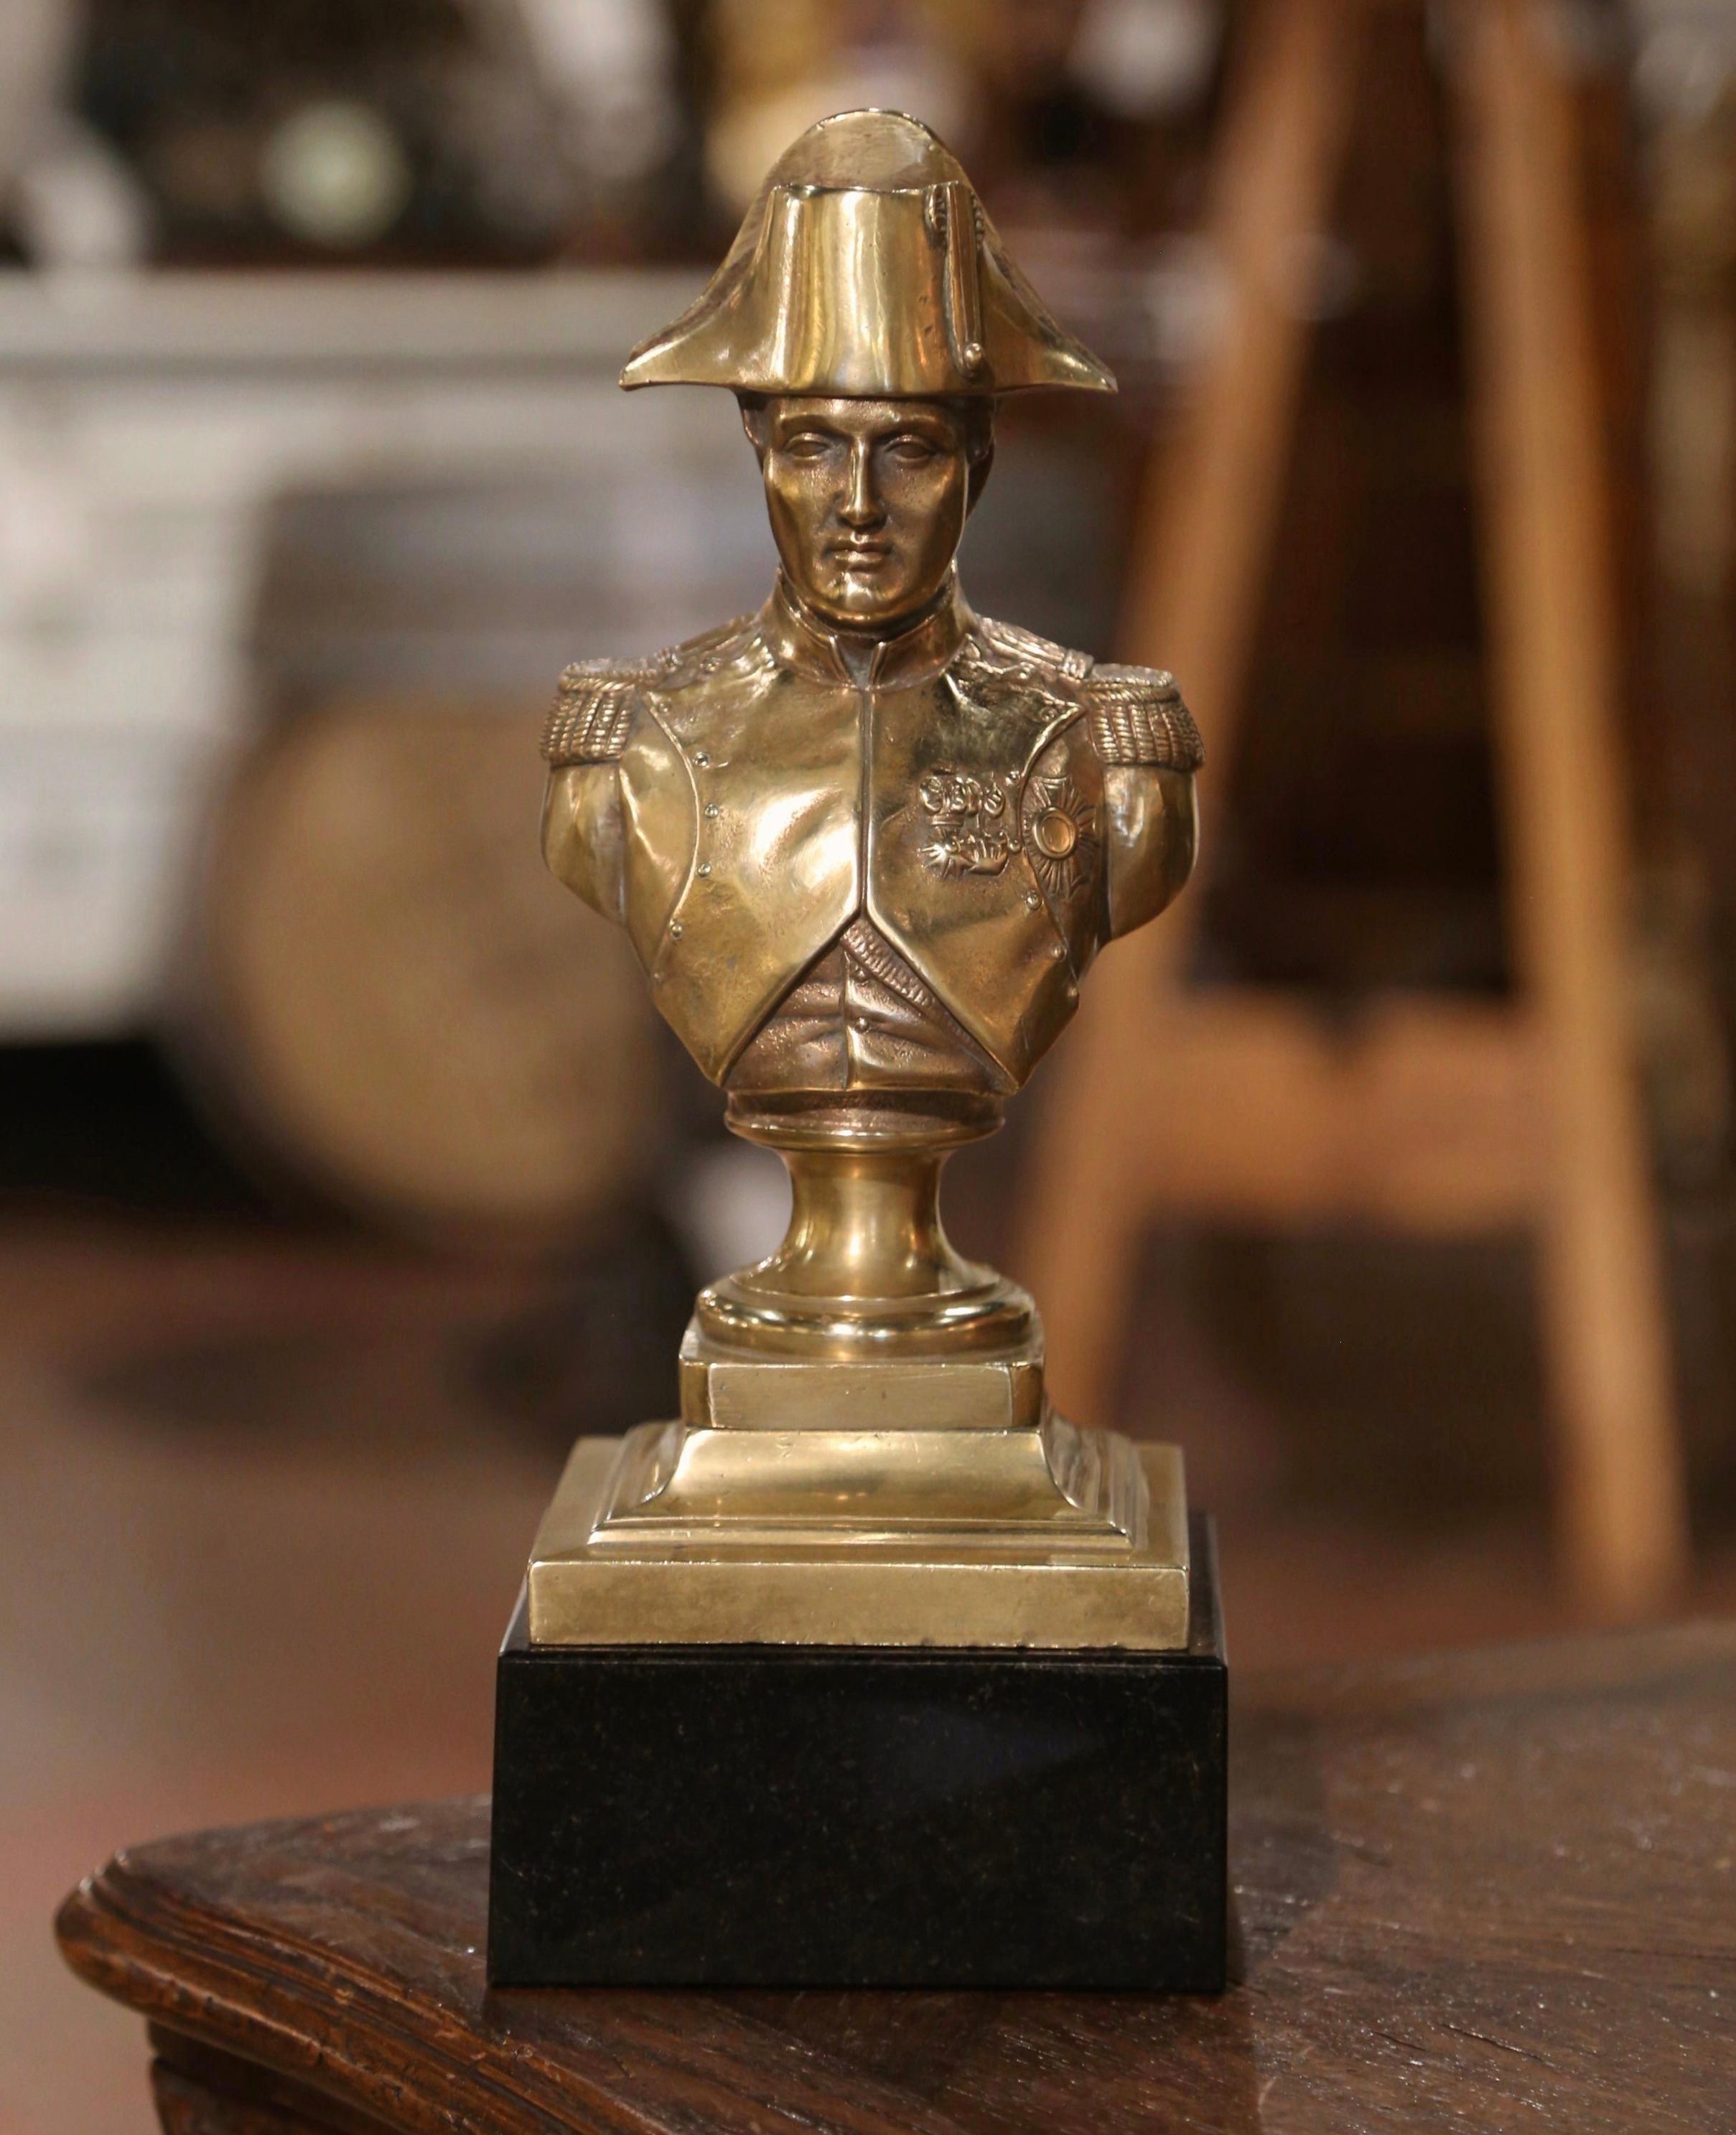 Decorate a man's office or study with this elegant antique bust. Created in France circa 1950, and built of bronze, the bust stands on a black granite base and depicts French emperor Napoleon Bonaparte. The work of art is signed on the back Ajaccio.